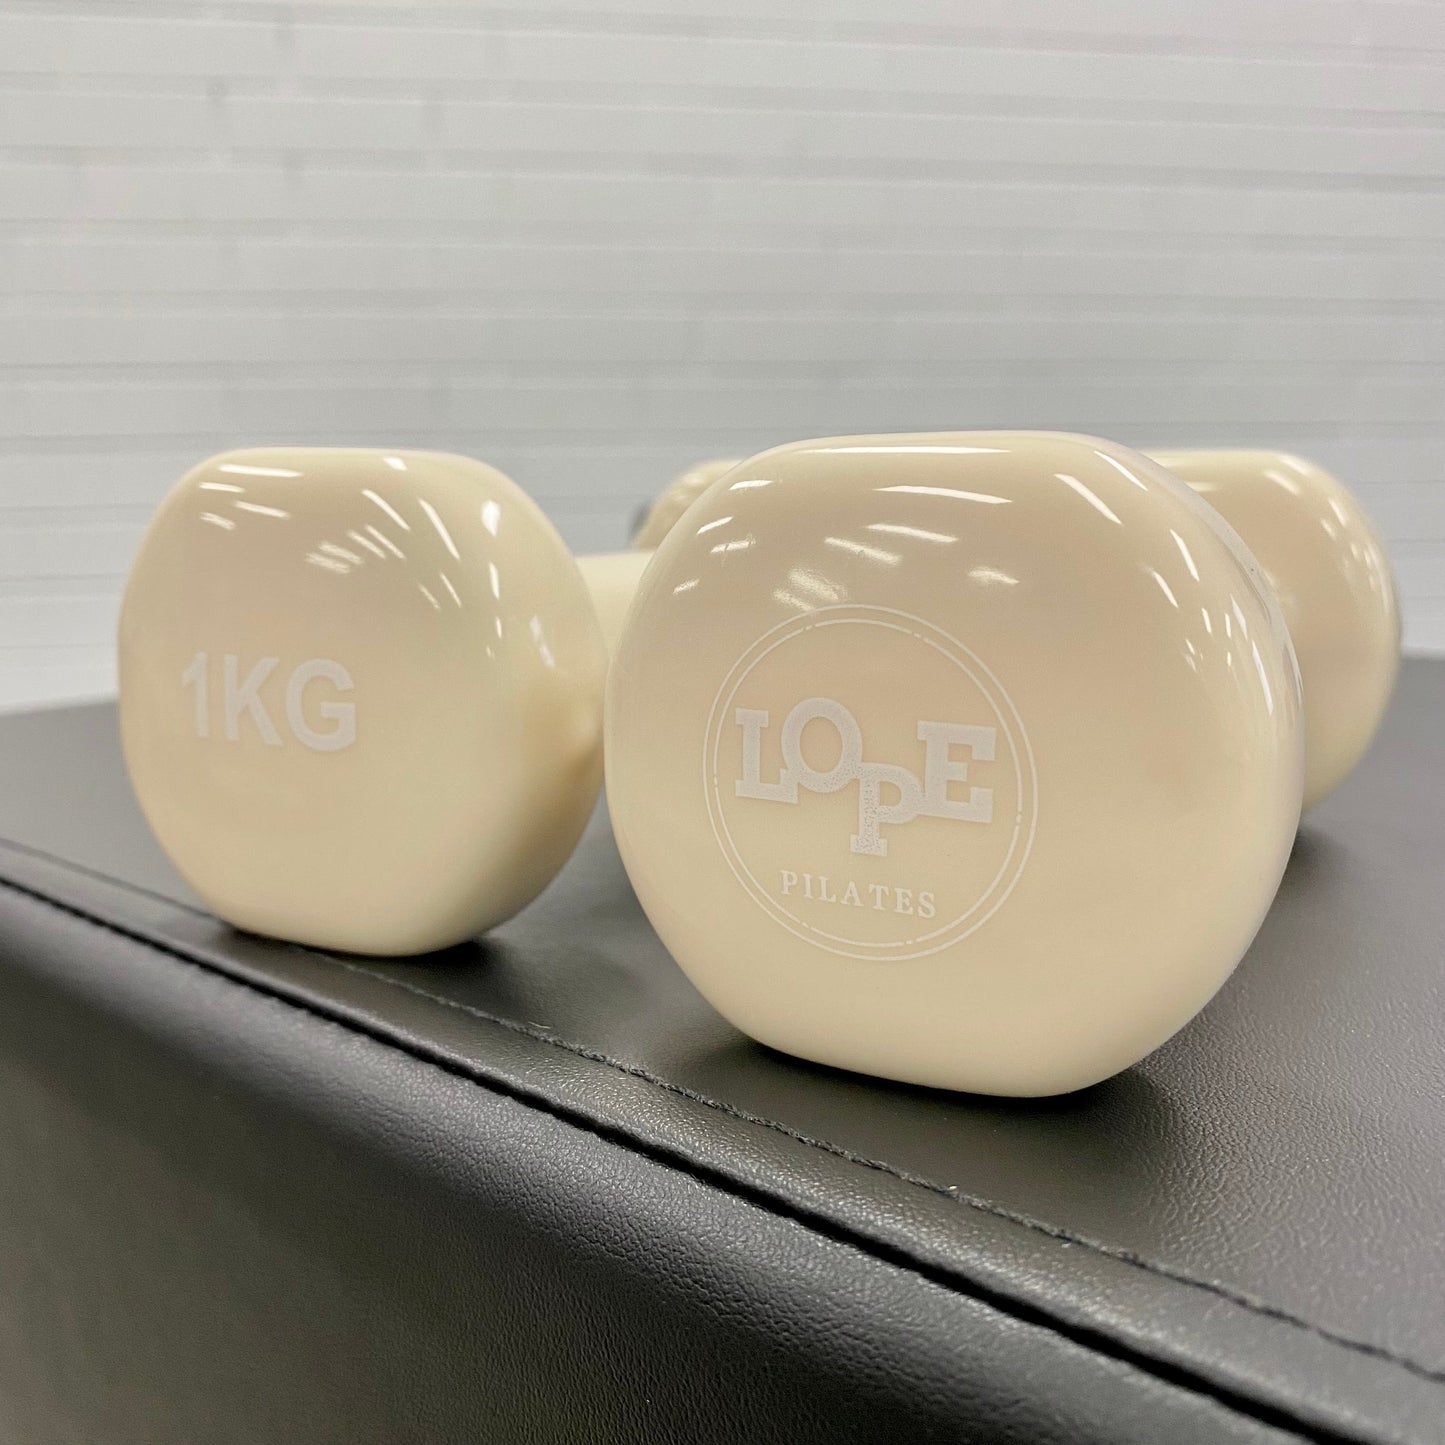 1kg Hand Held Weights - One pair